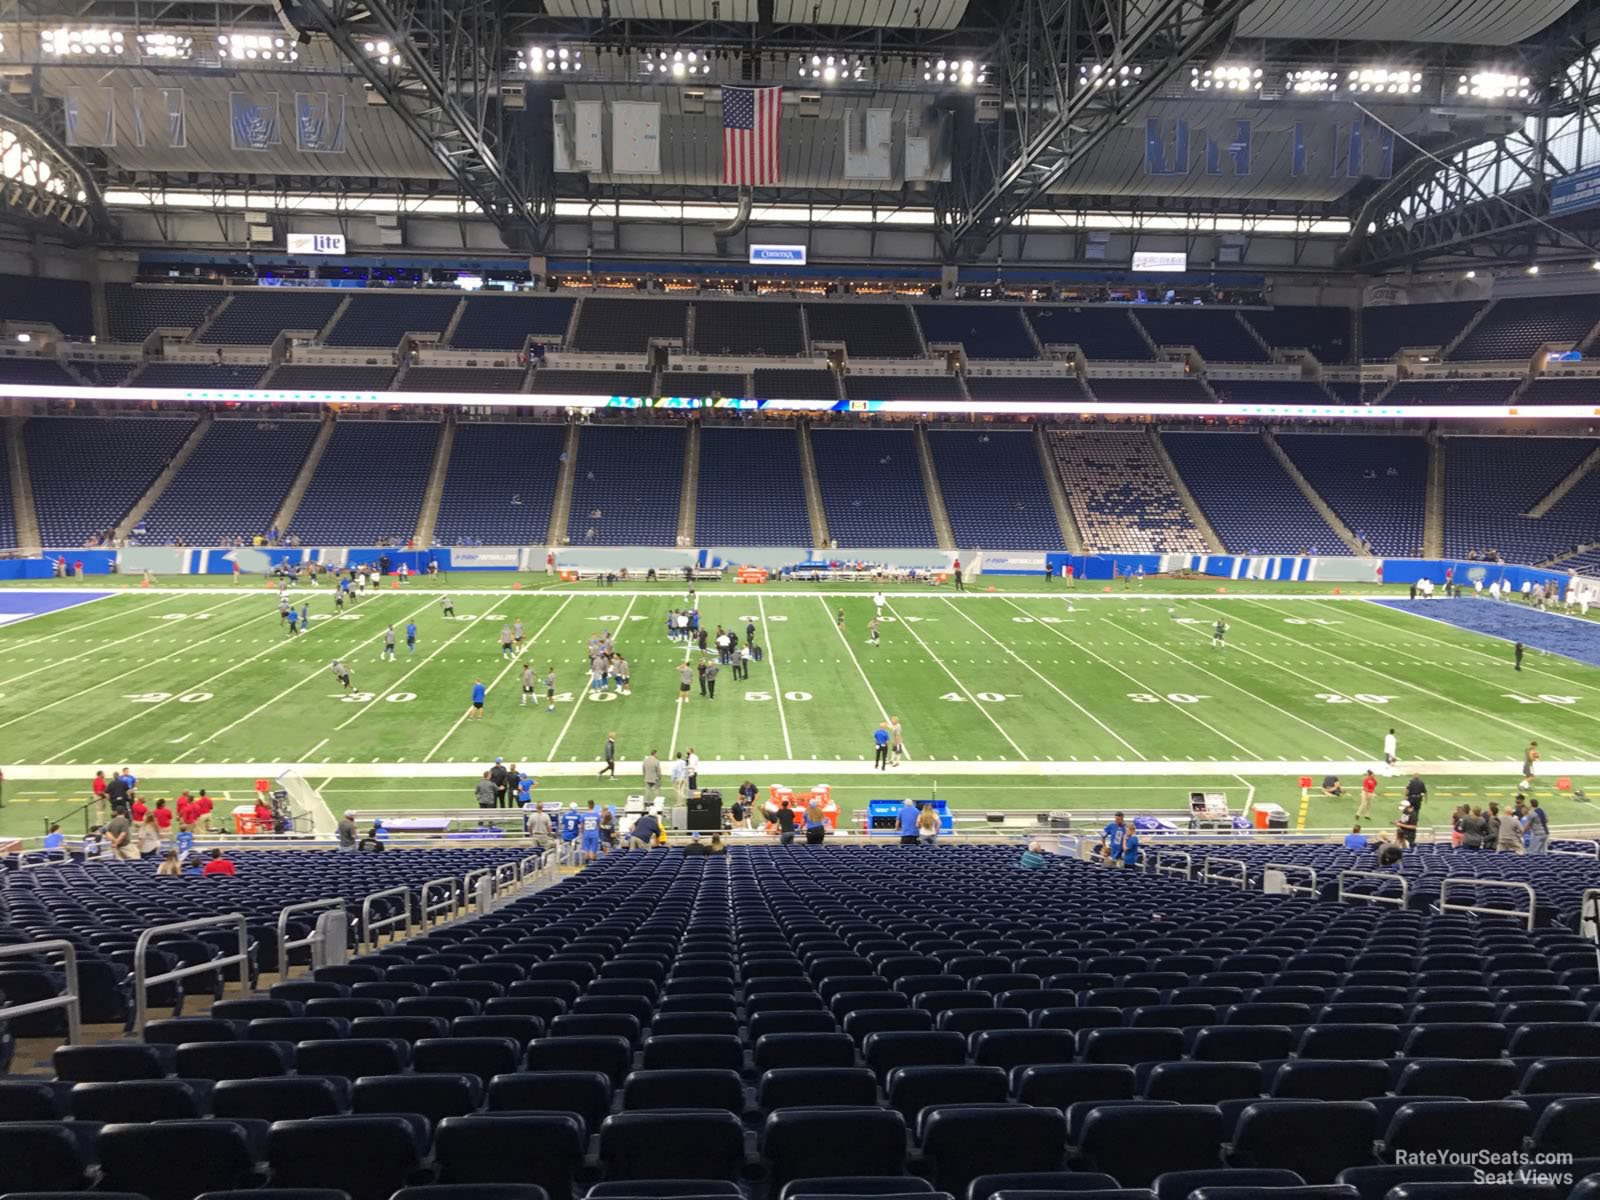 section 106, row 33 seat view  for football - ford field